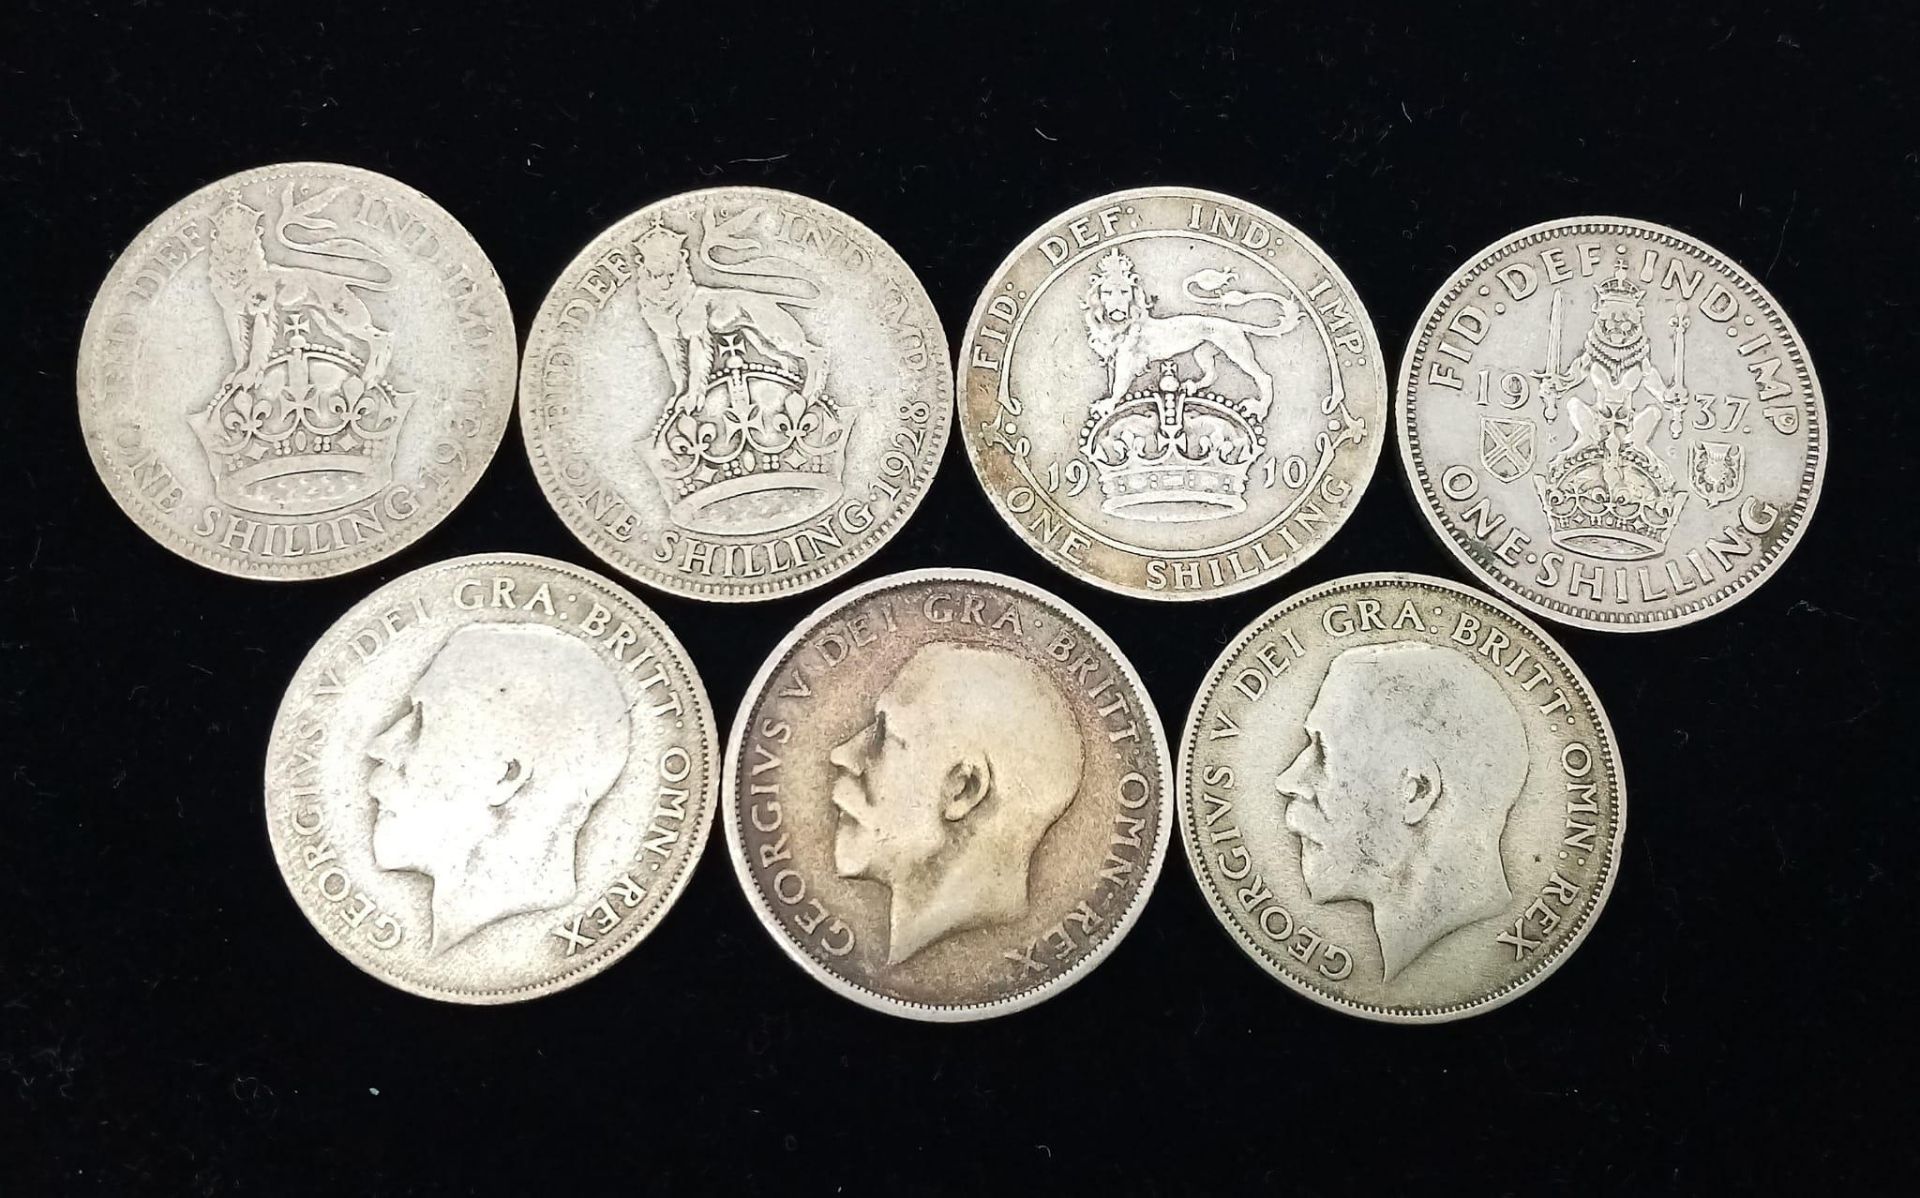 41 Pre 1947 British Silver Shilling Coins. 222g total weight. Please see photos for finer details. - Image 3 of 3